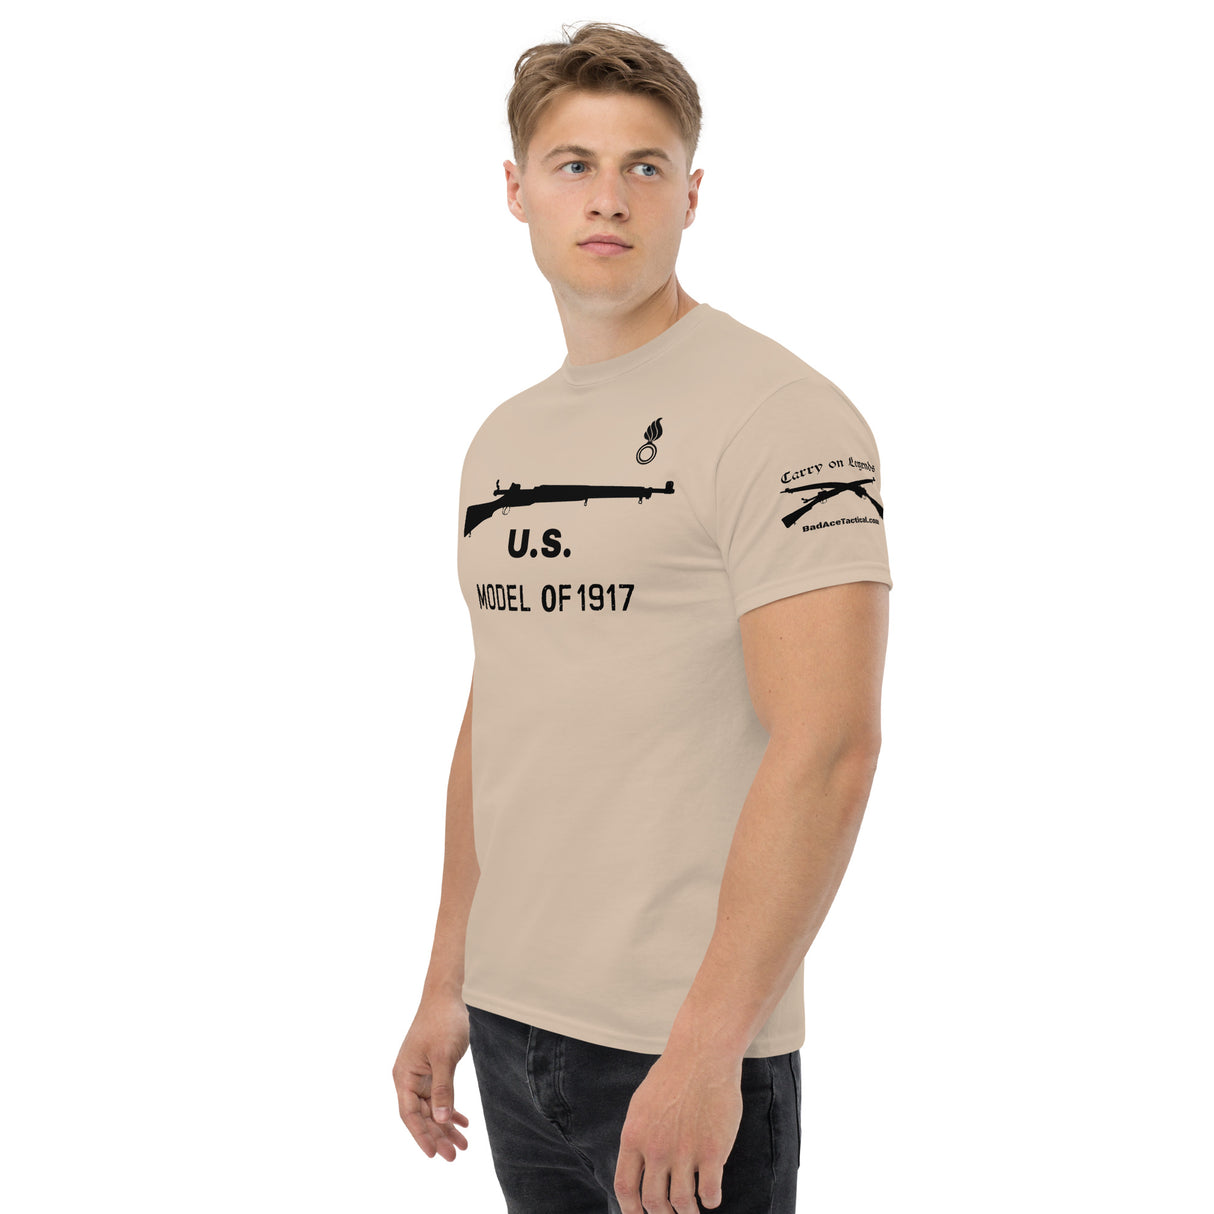 U.S. Model 1917 cotton T-shirt with shell and flame ordnance stamp dark font